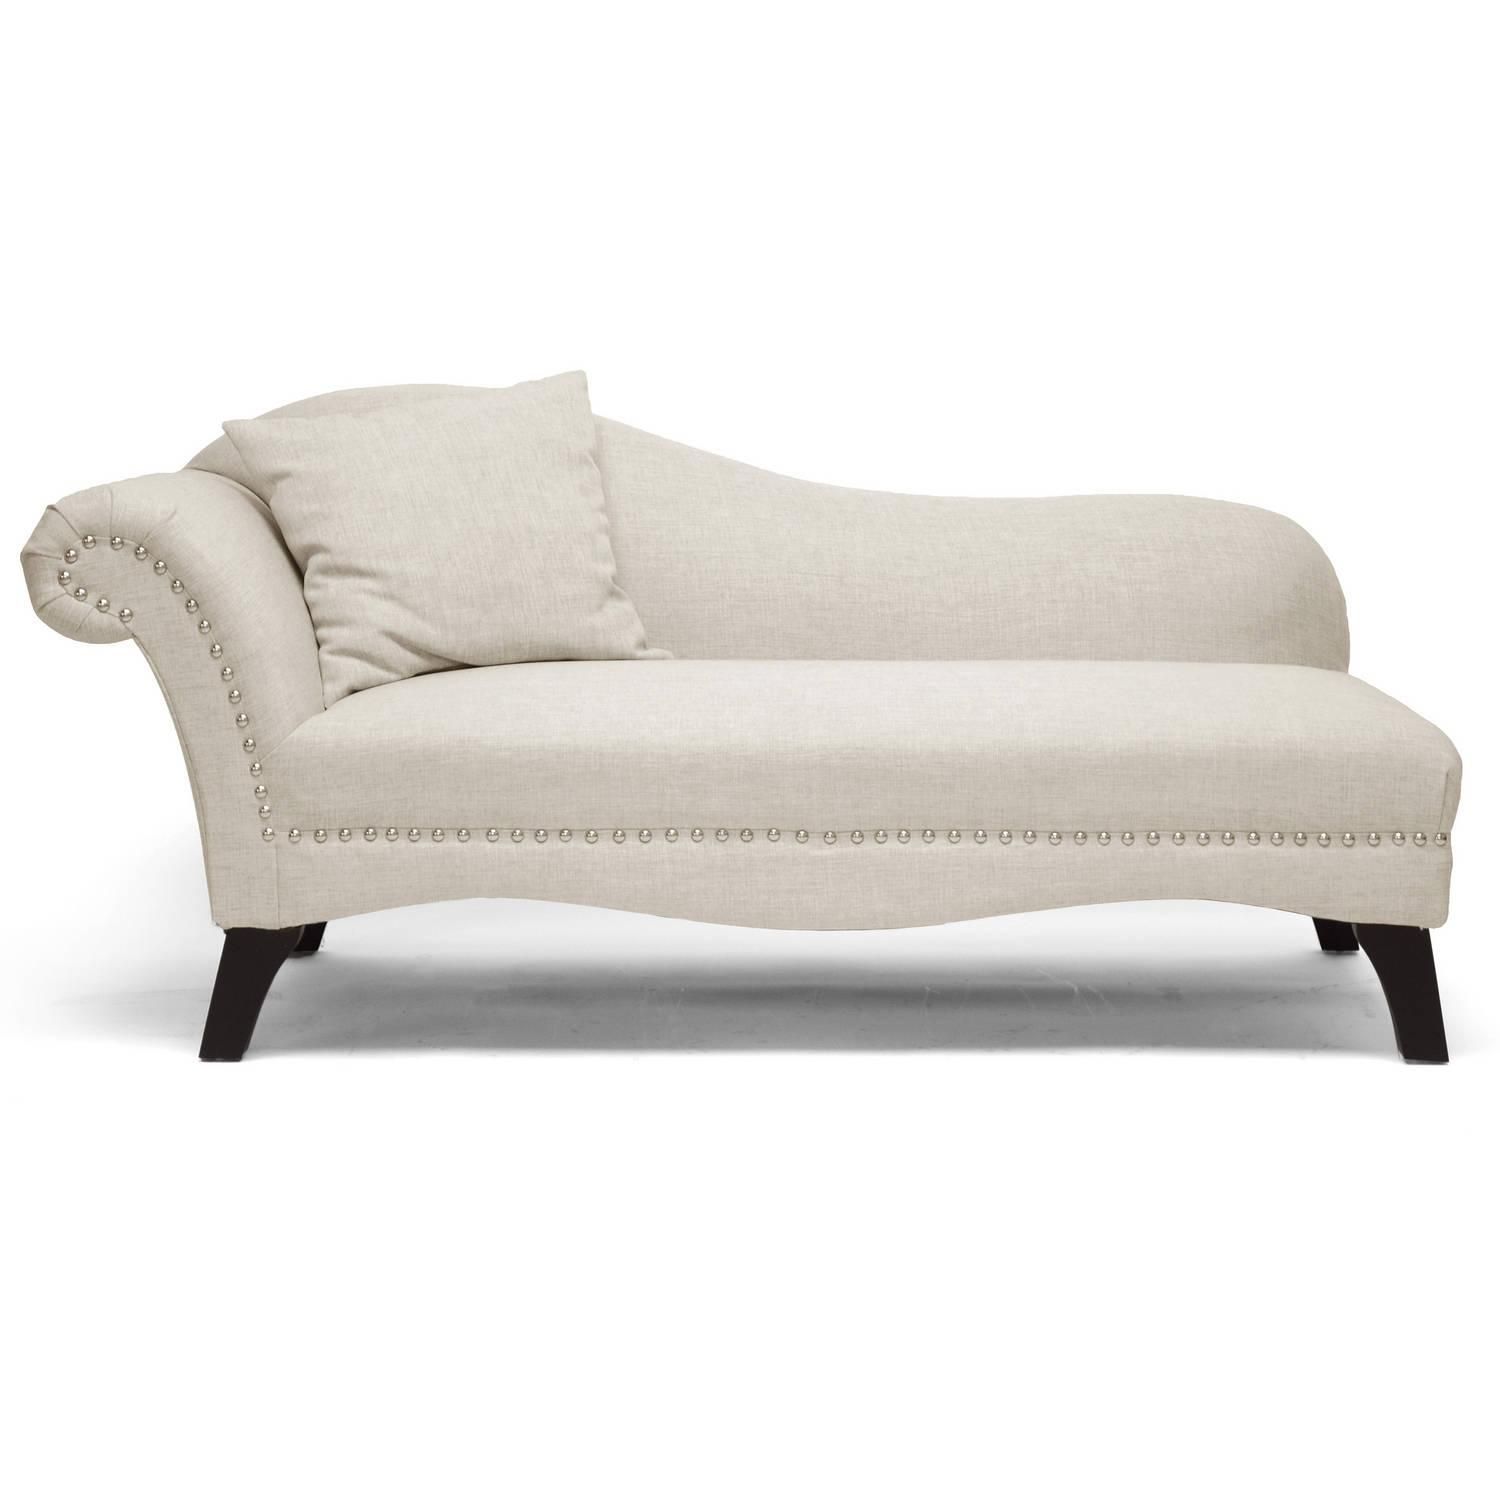 Chaise Lounges – Walmart For Sofa Lounge Chairs (View 3 of 20)